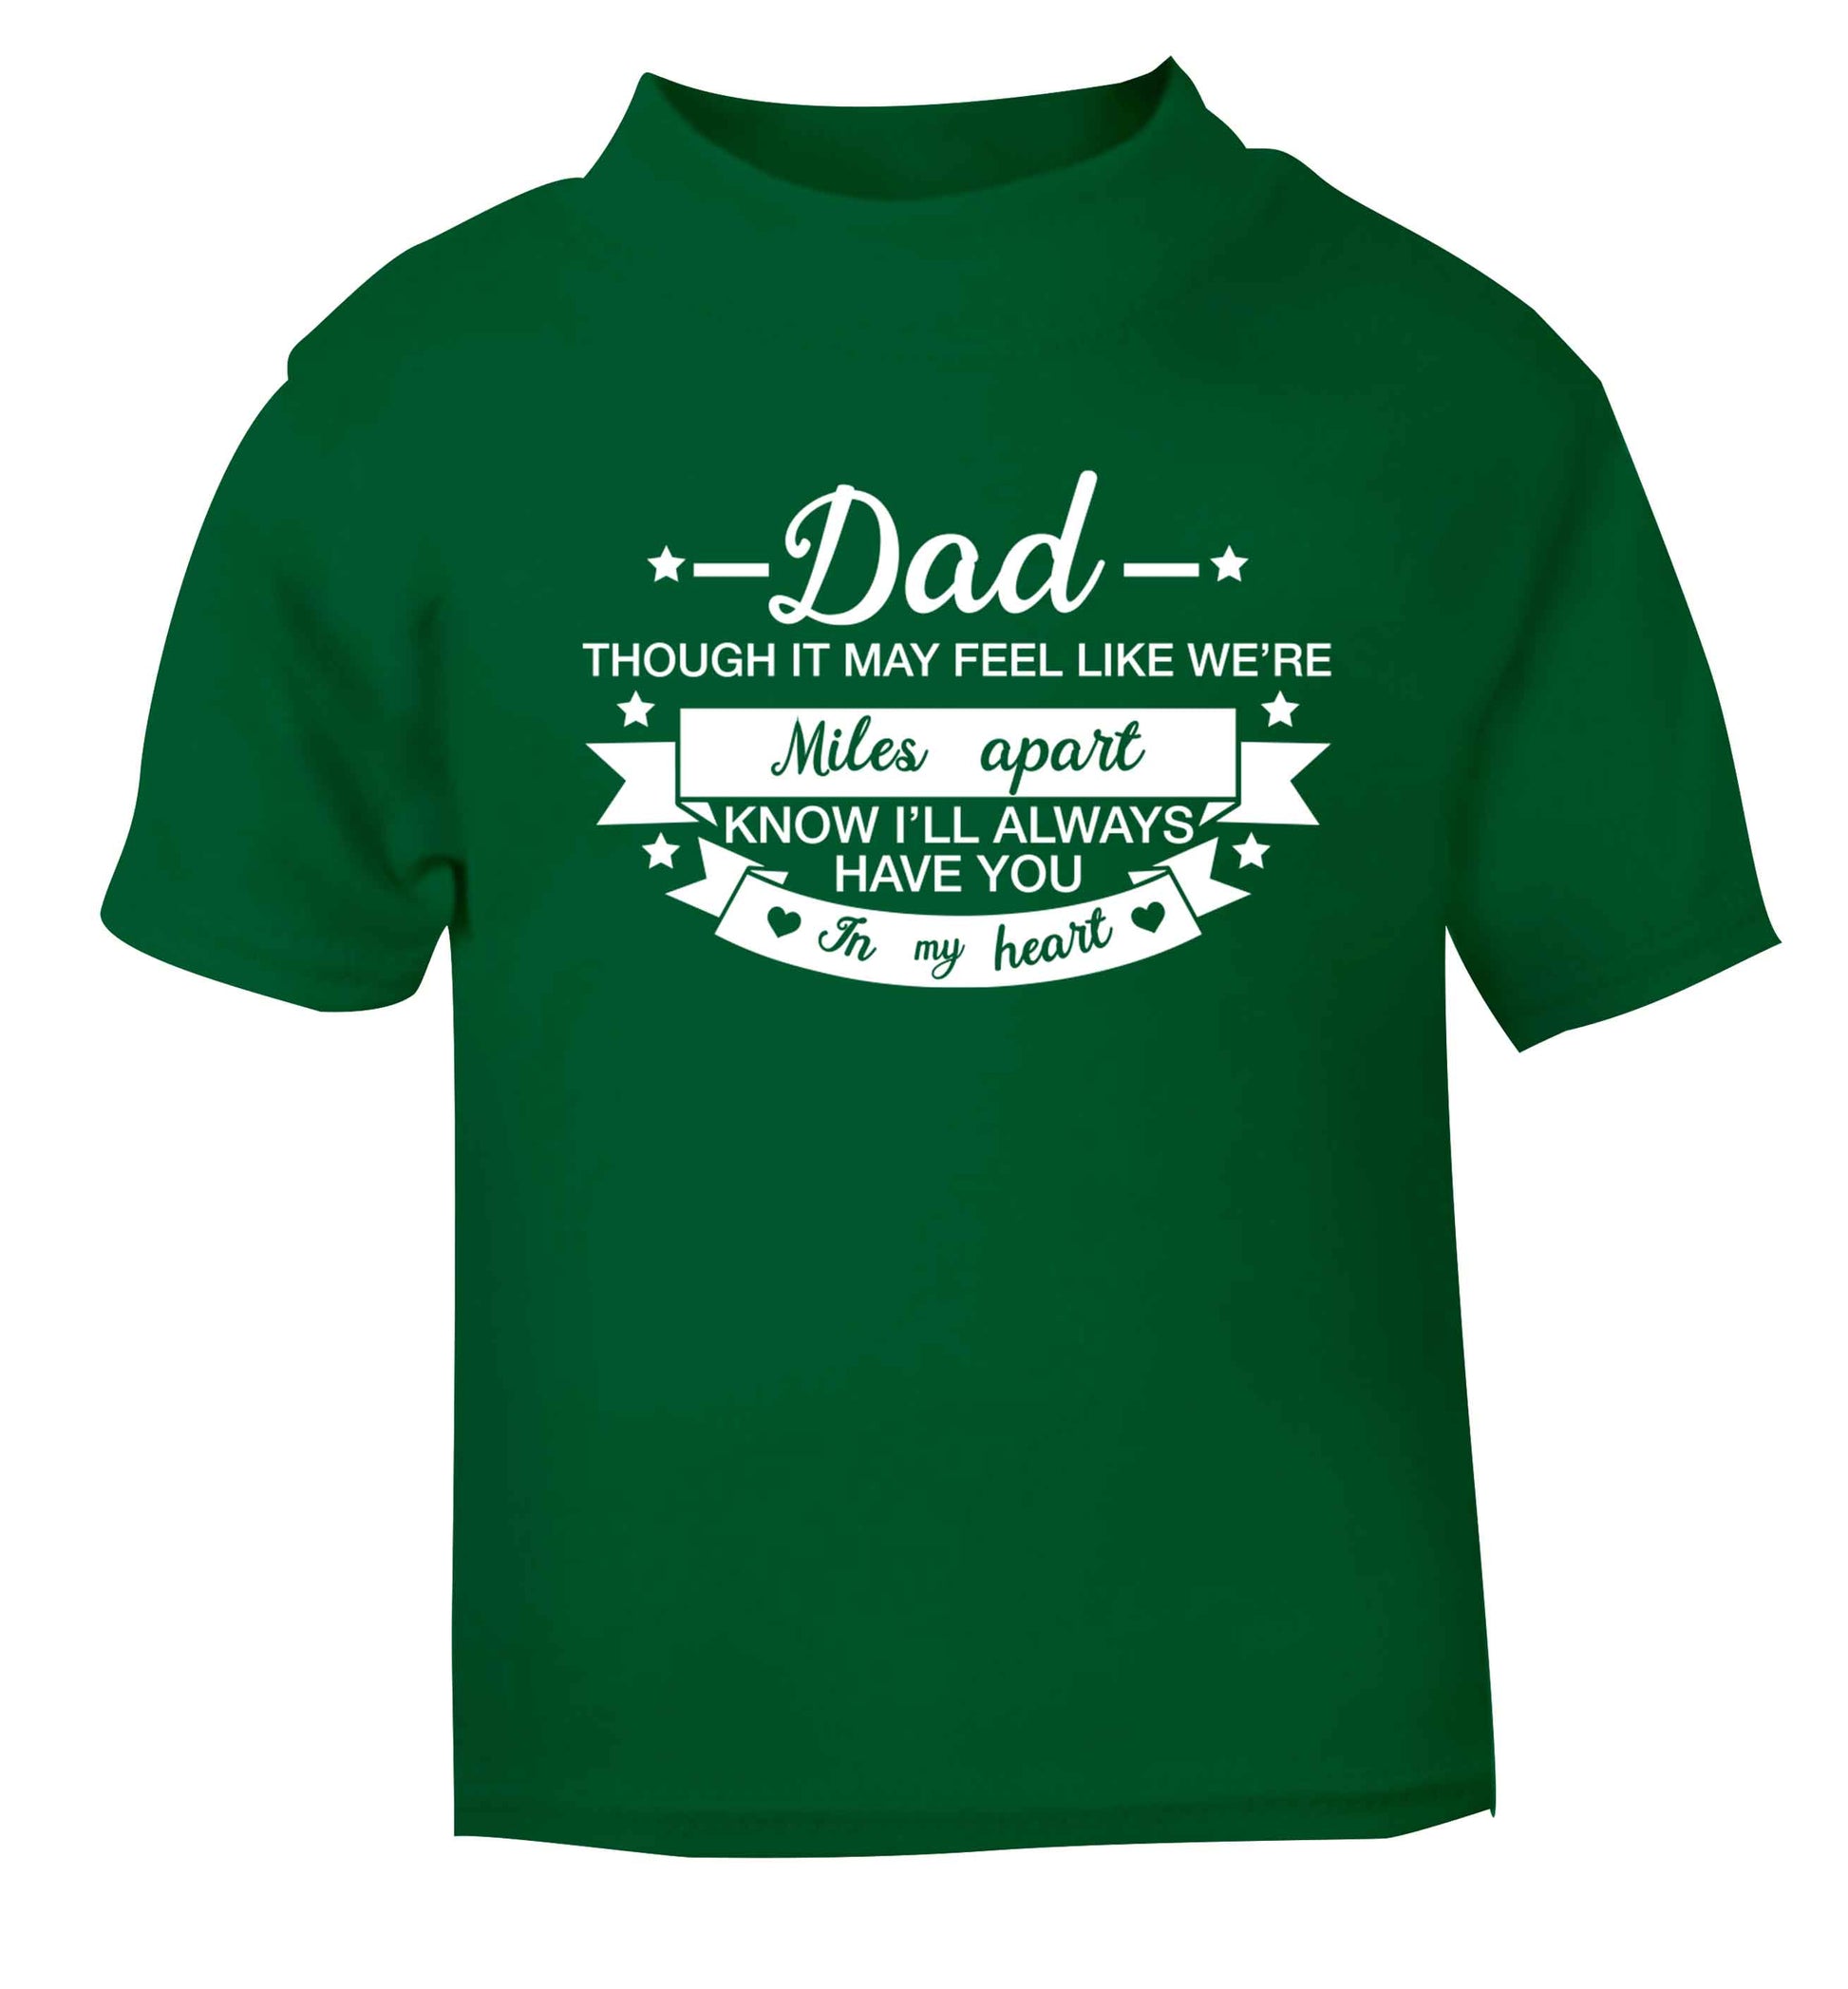 Dad though it may feel like we're miles apart know I'll always have you in my heart green baby toddler Tshirt 2 Years